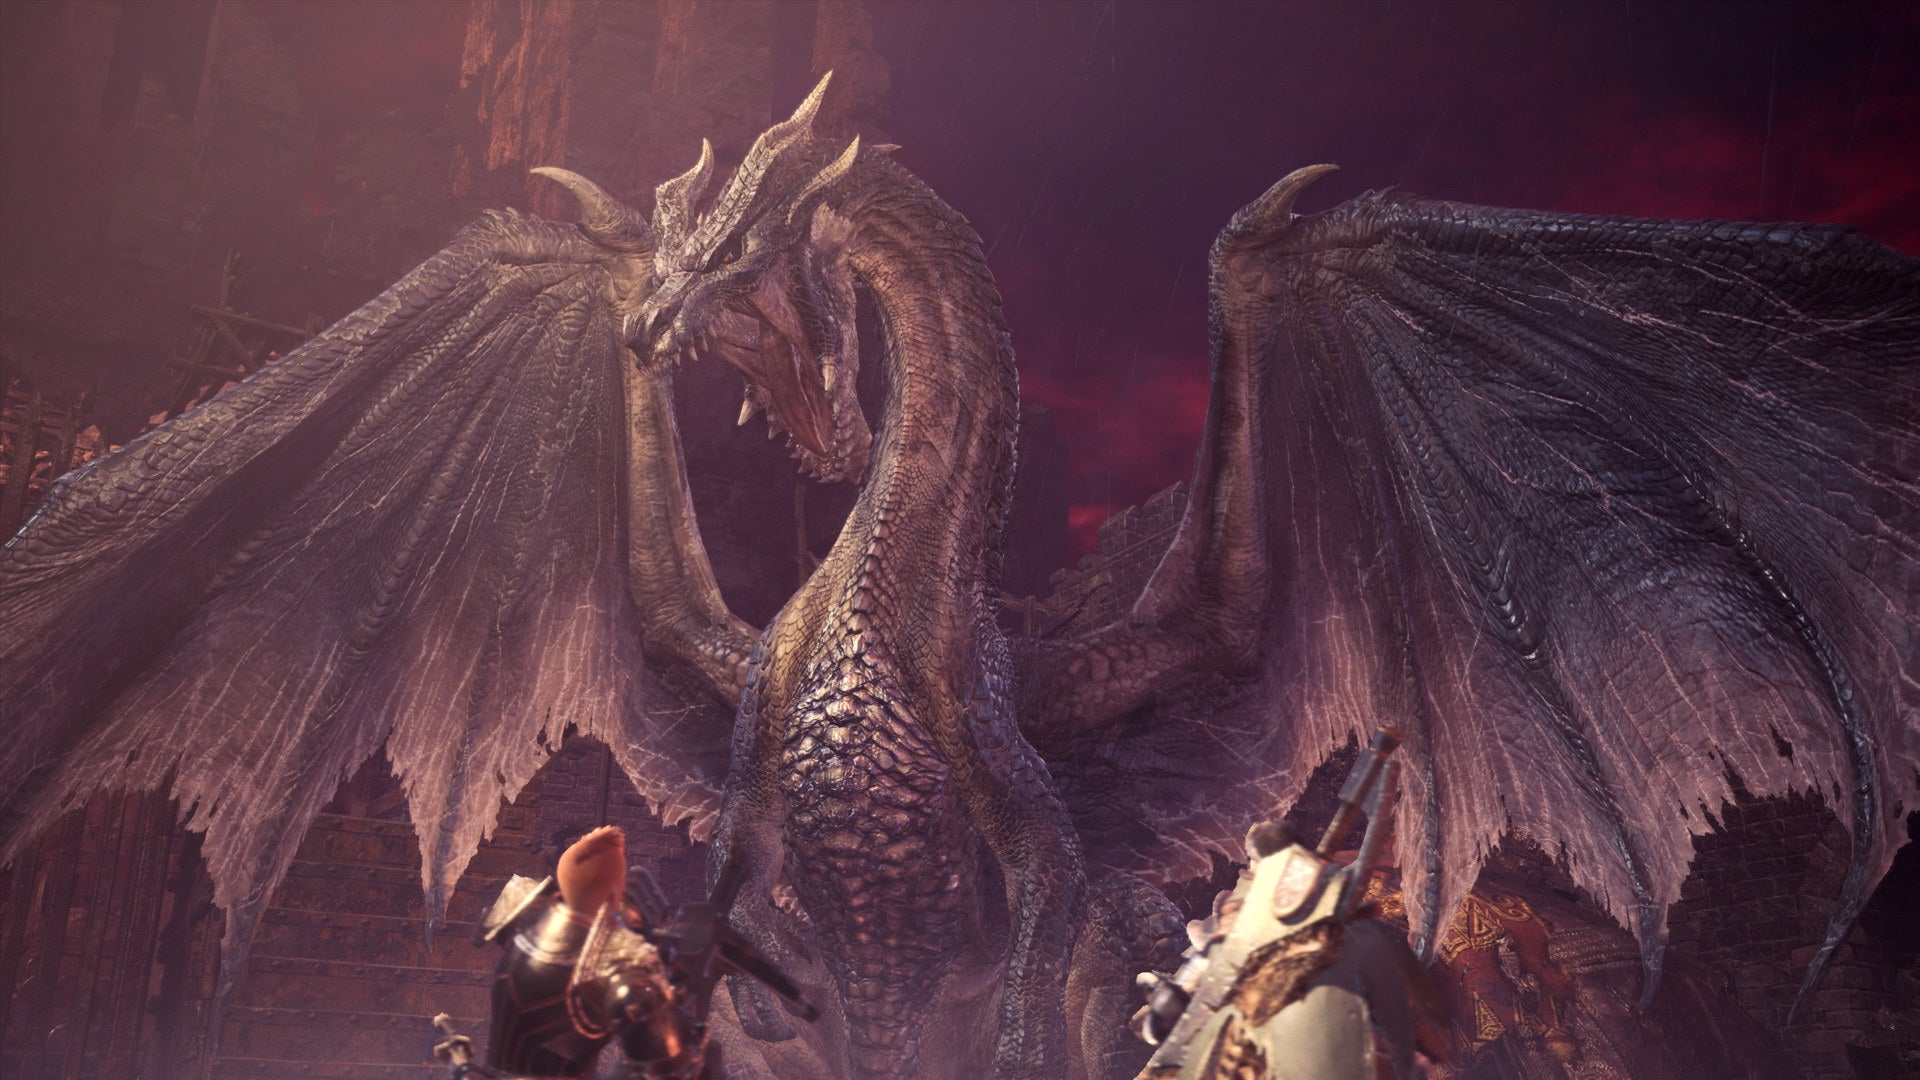 Image for Monster Hunter World: Iceborne's final update will add a big dragon, Fatalis